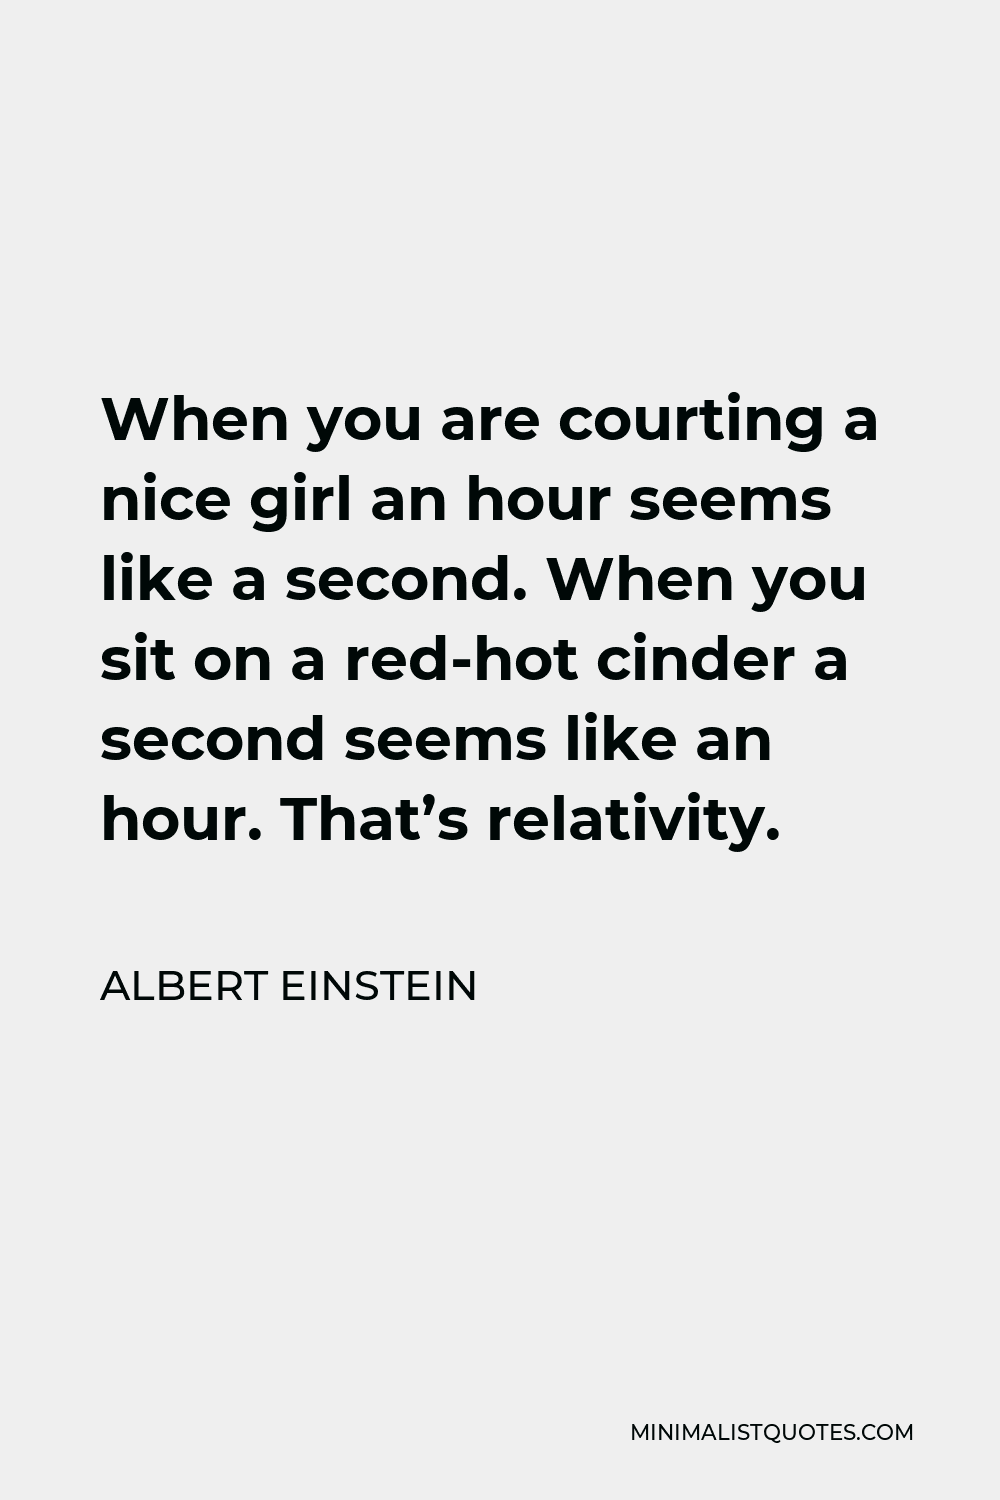 Albert Einstein Quote - When you are courting a nice girl an hour seems like a second. When you sit on a red-hot cinder a second seems like an hour. That’s relativity.